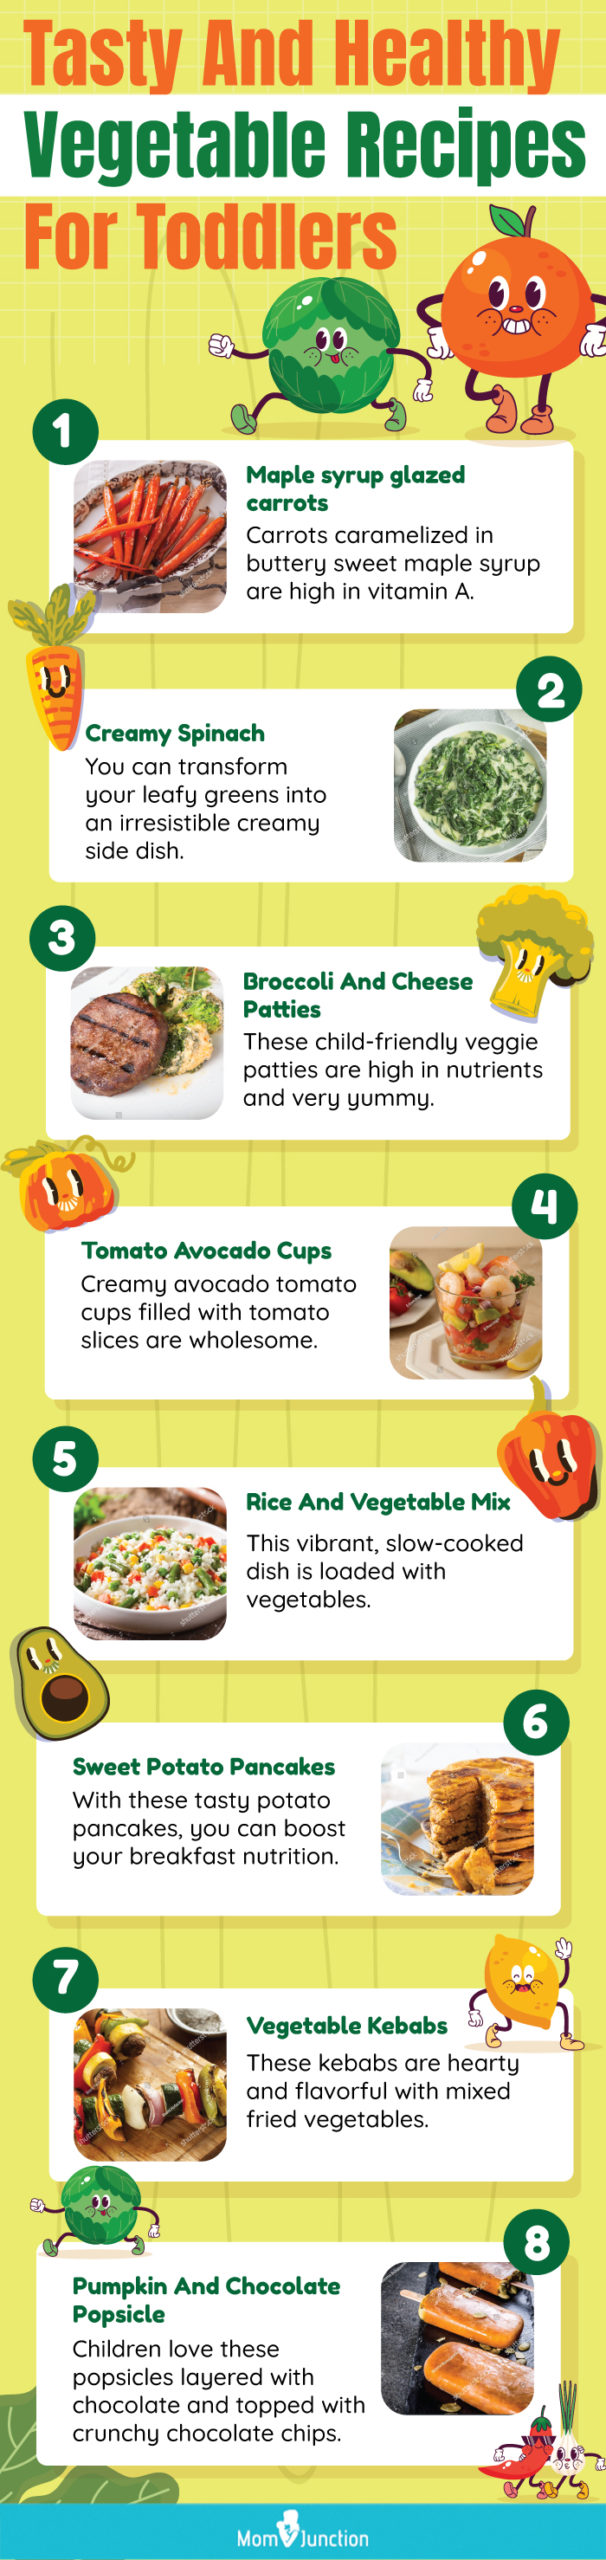 tasty and healthy vegetable recipes for toddlers (infographic)